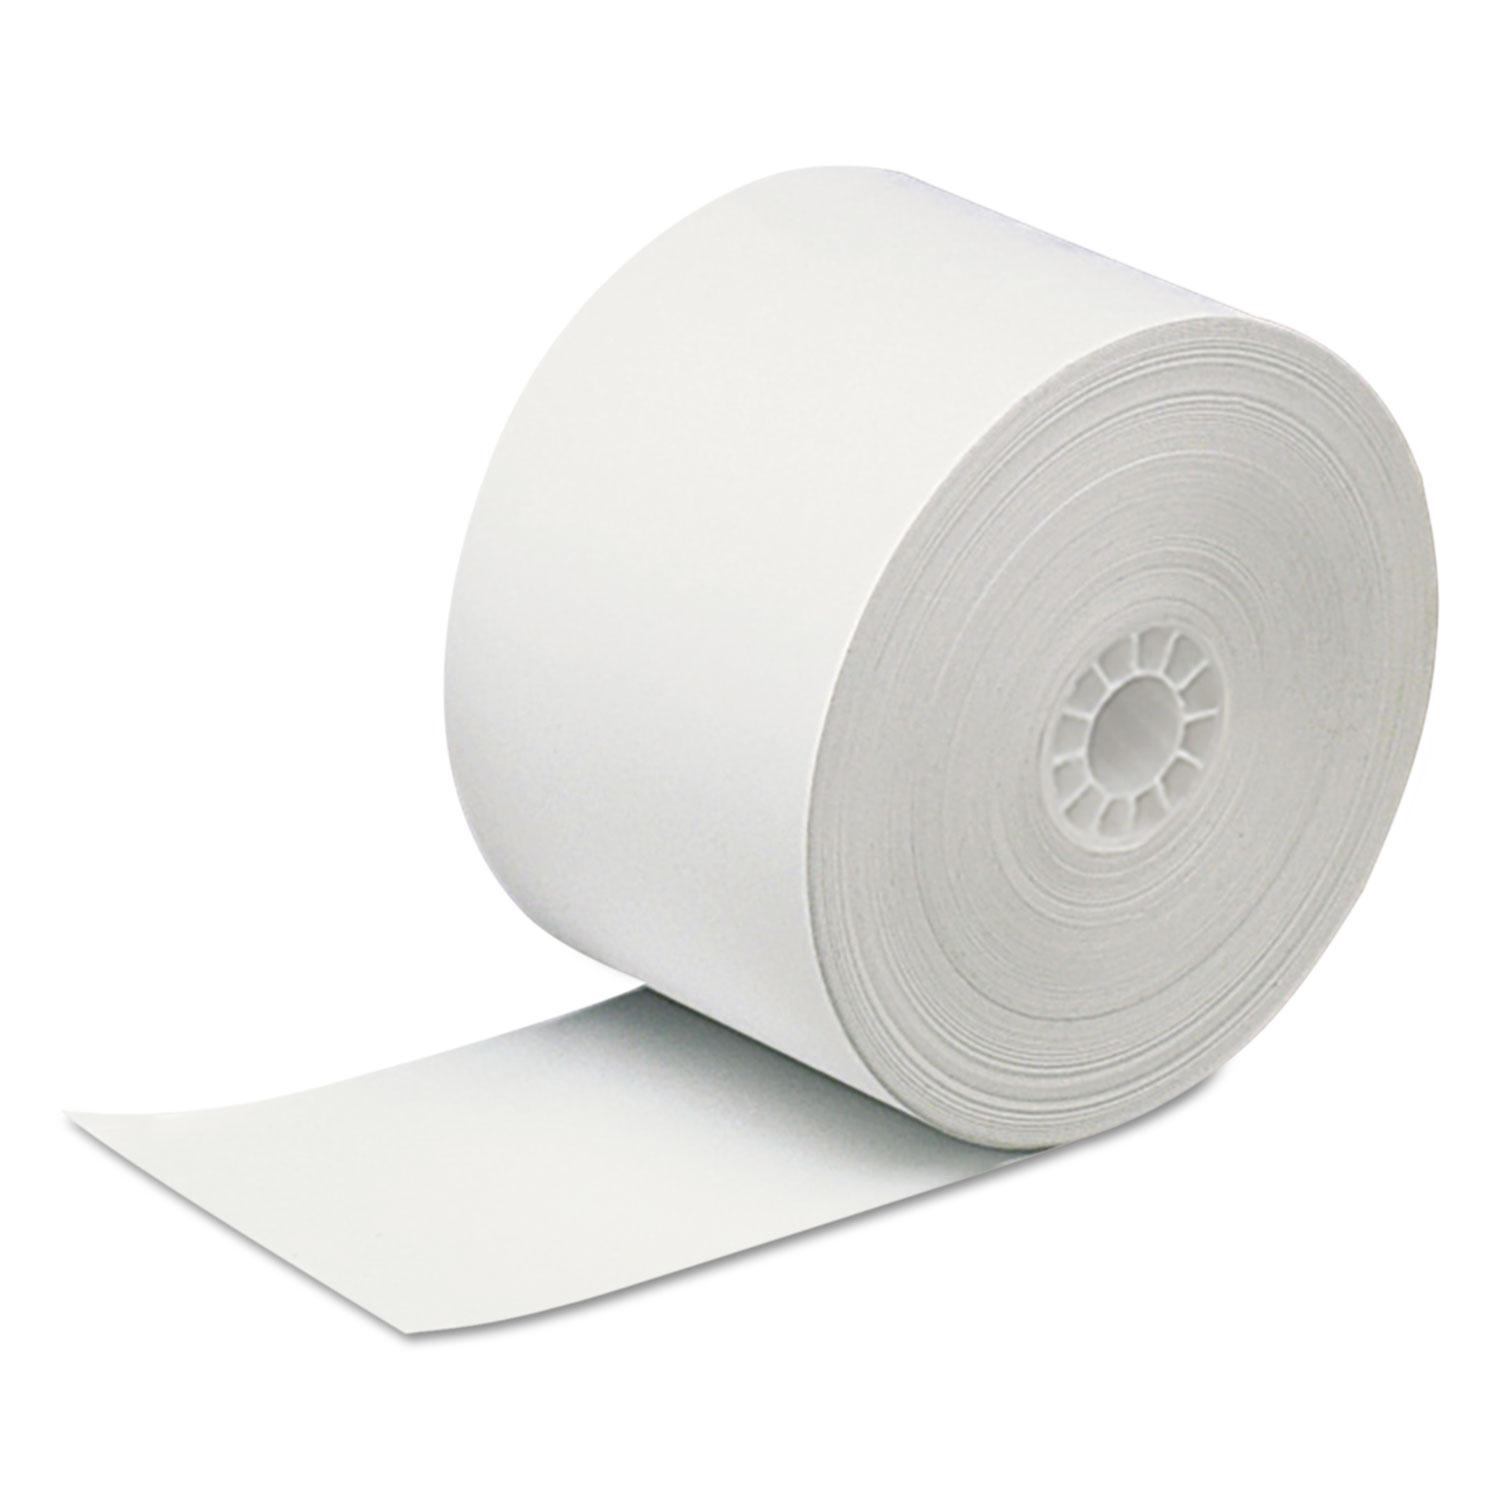  Iconex 09650 Direct Thermal Printing Paper Rolls, 0.69 Core, 2.31 x 400 ft, White, 12/Carton (ICX90782978) 